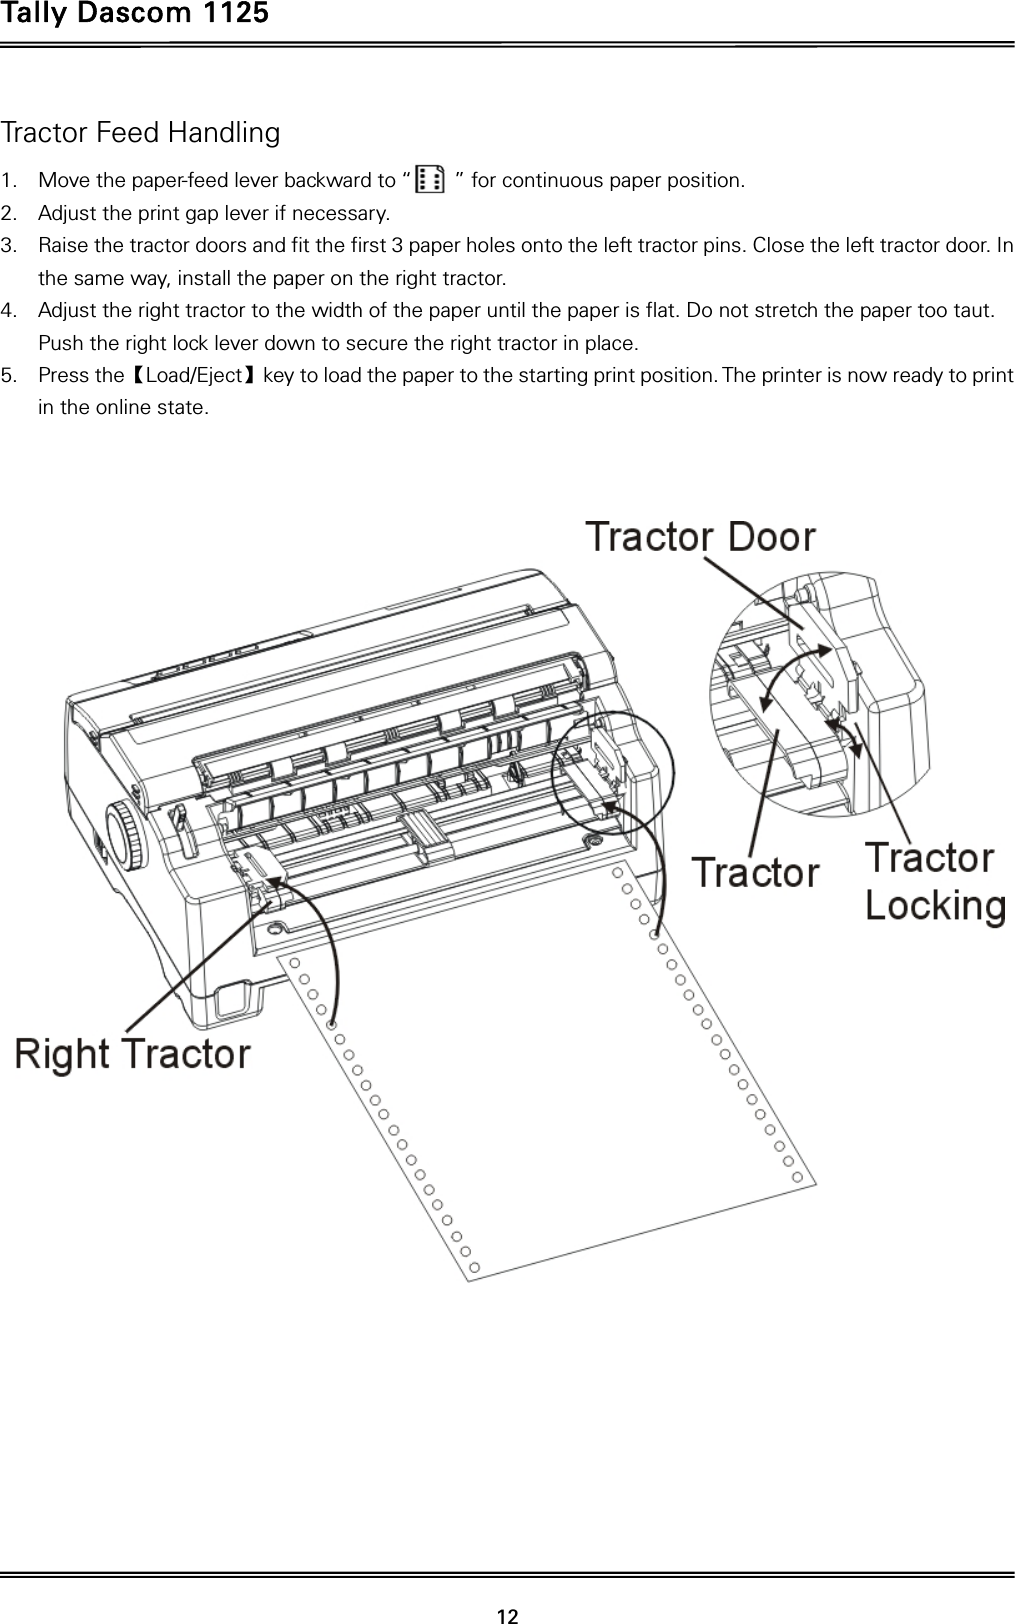 Tally Dascom 1125 12 Tractor Feed Handling 1. Move the paper-feed lever backward to “        ” for continuous paper position. 2. Adjust the print gap lever if necessary.   3. Raise the tractor doors and fit the first 3 paper holes onto the left tractor pins. Close the left tractor door. In the same way, install the paper on the right tractor.   4. Adjust the right tractor to the width of the paper until the paper is flat. Do not stretch the paper too taut. Push the right lock lever down to secure the right tractor in place. 5. Press theǏLoad/Ejectǐkey to load the paper to the starting print position. The printer is now ready to print in the online state.    